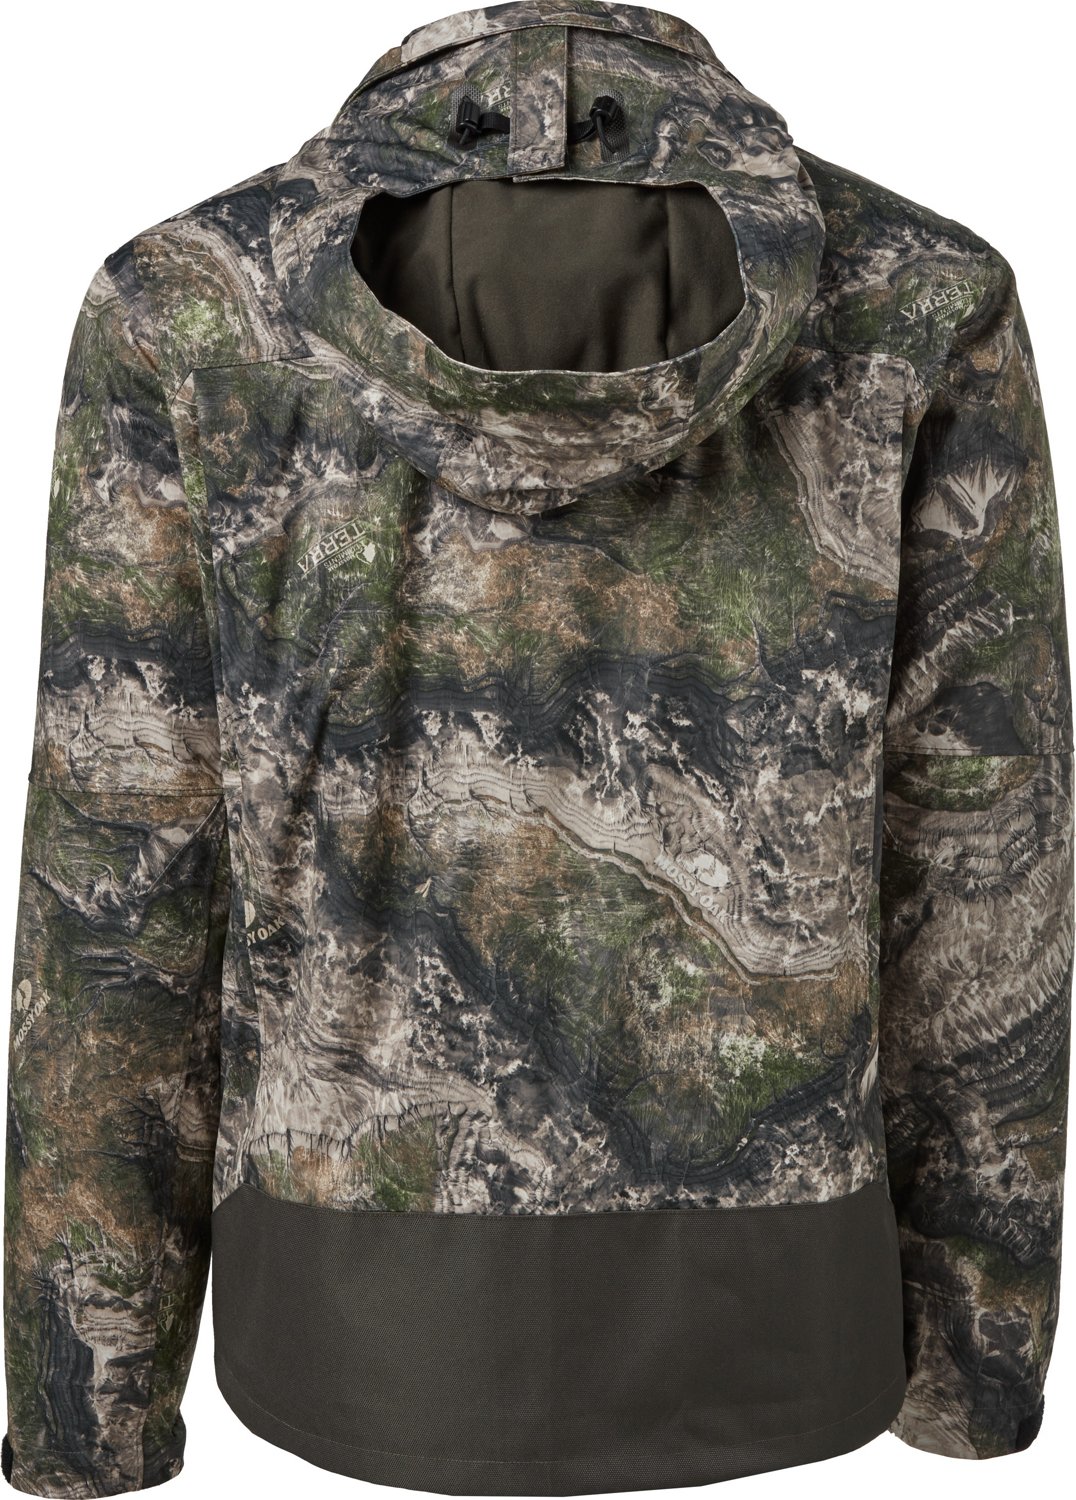 Magellan Outdoors Pro Men's 3-in-1 Systems Camo Jacket